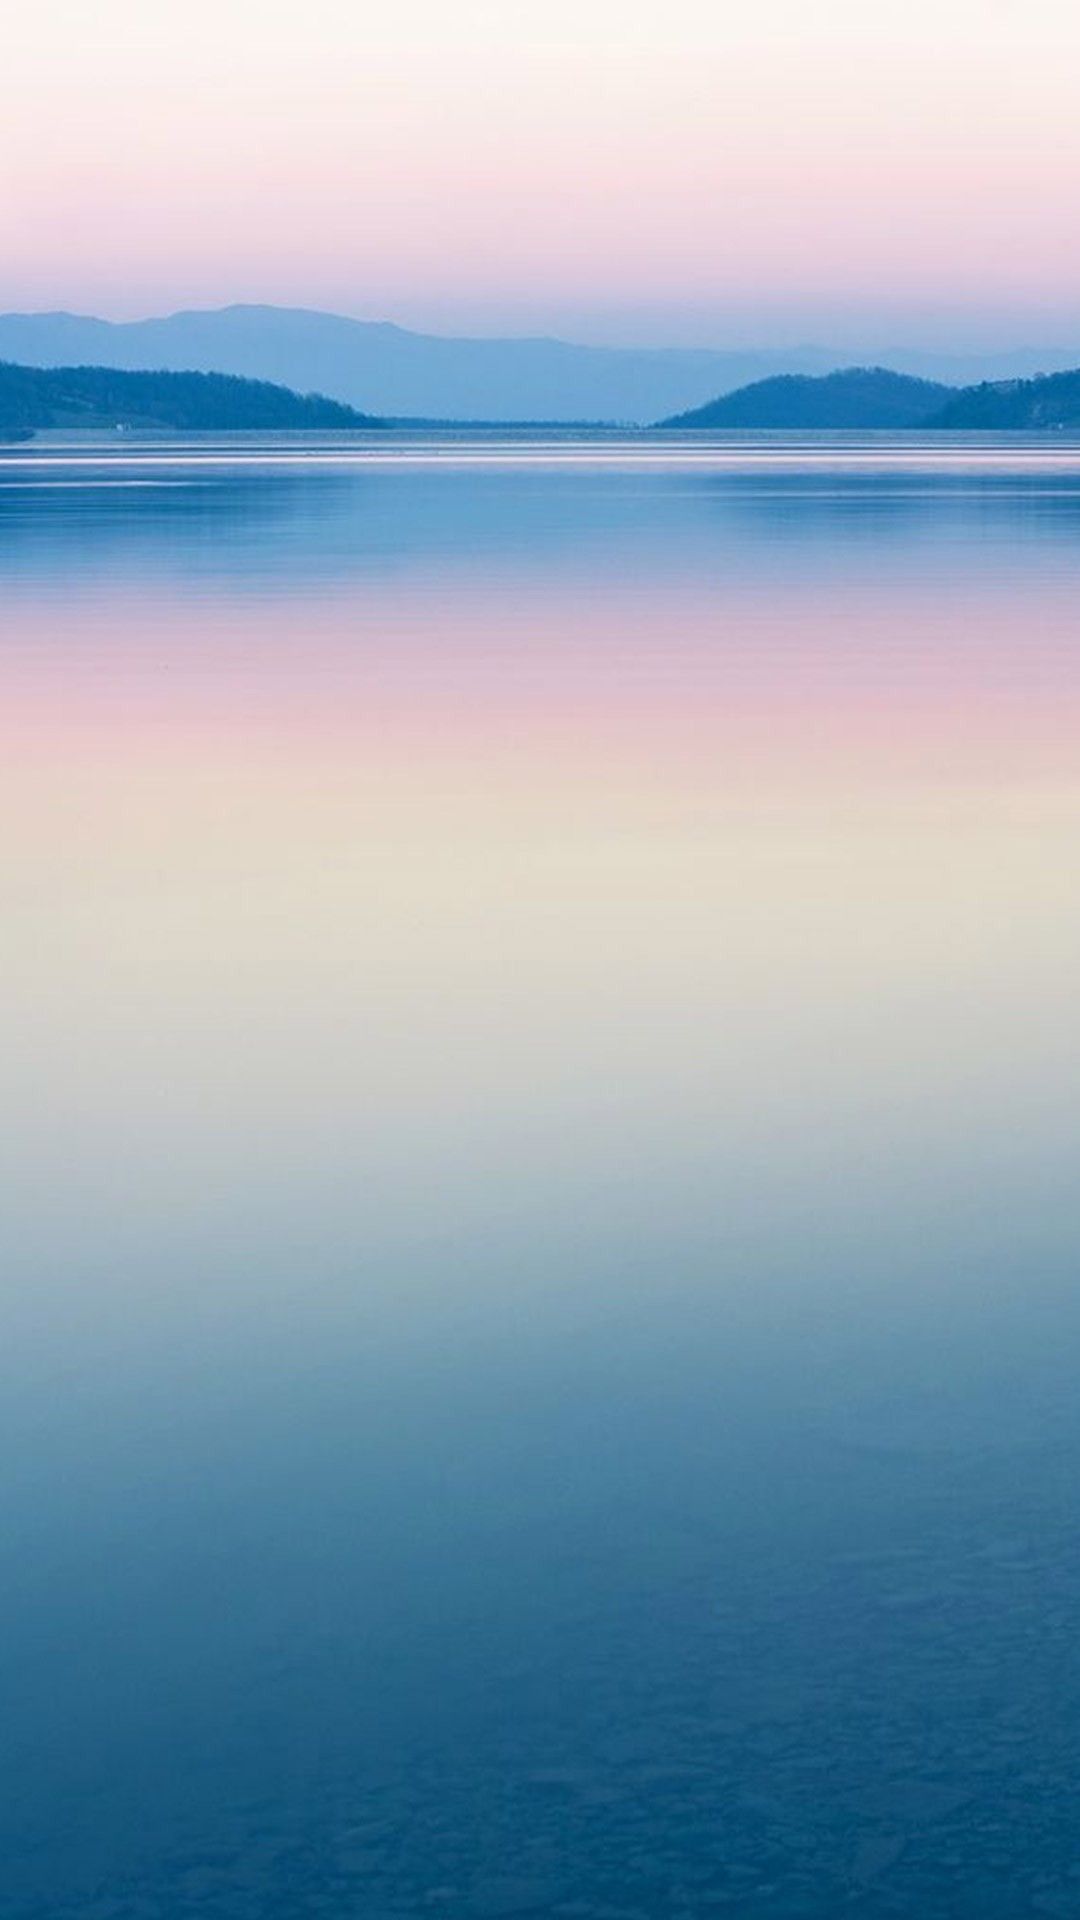 A peaceful  calming wallpaper which I have been using for soo long  Author Kuldar Leement  rwallpapers